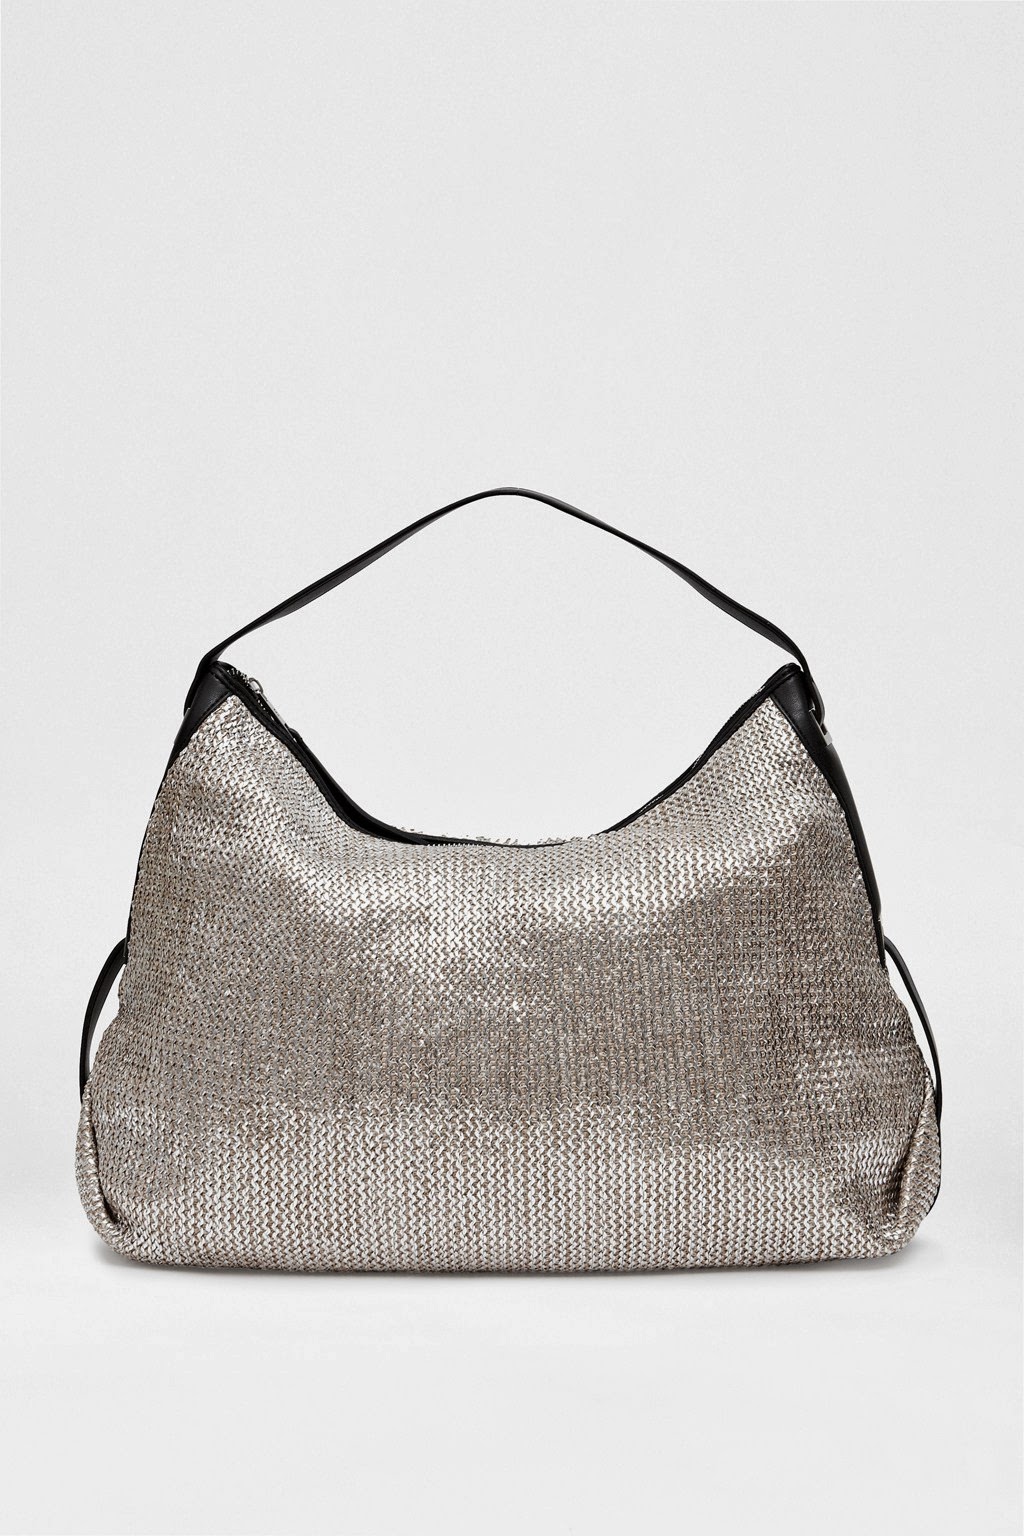  French Connection Florence Woven Hobo Bag